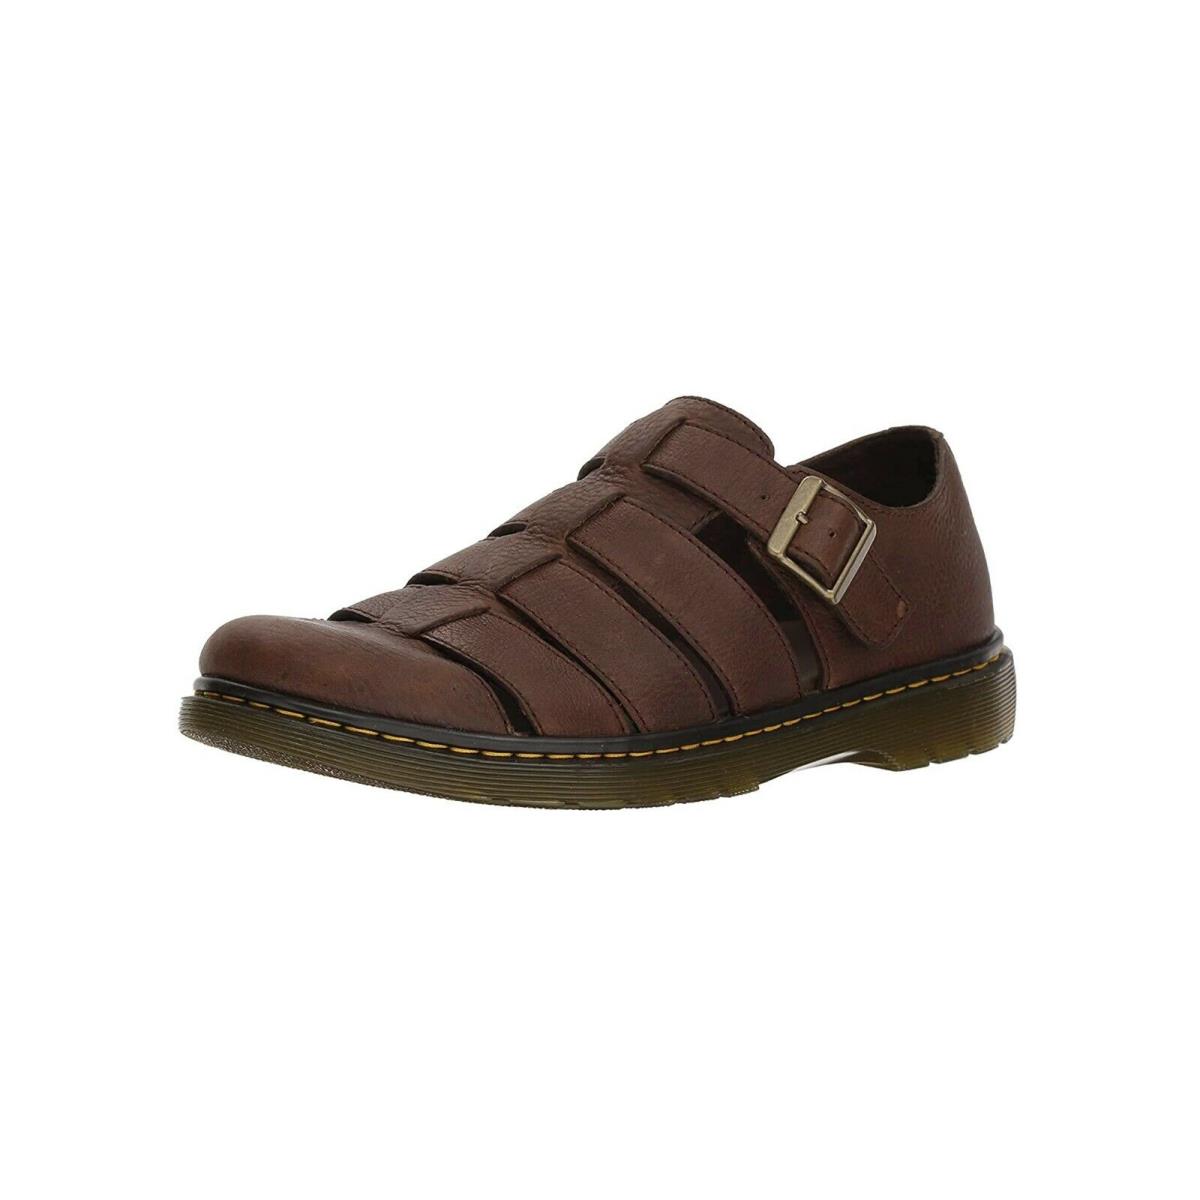 Dr Martens Fenton Dark Brown Grizzly Men`s Fisherman Closed Toe Sandals Shoes